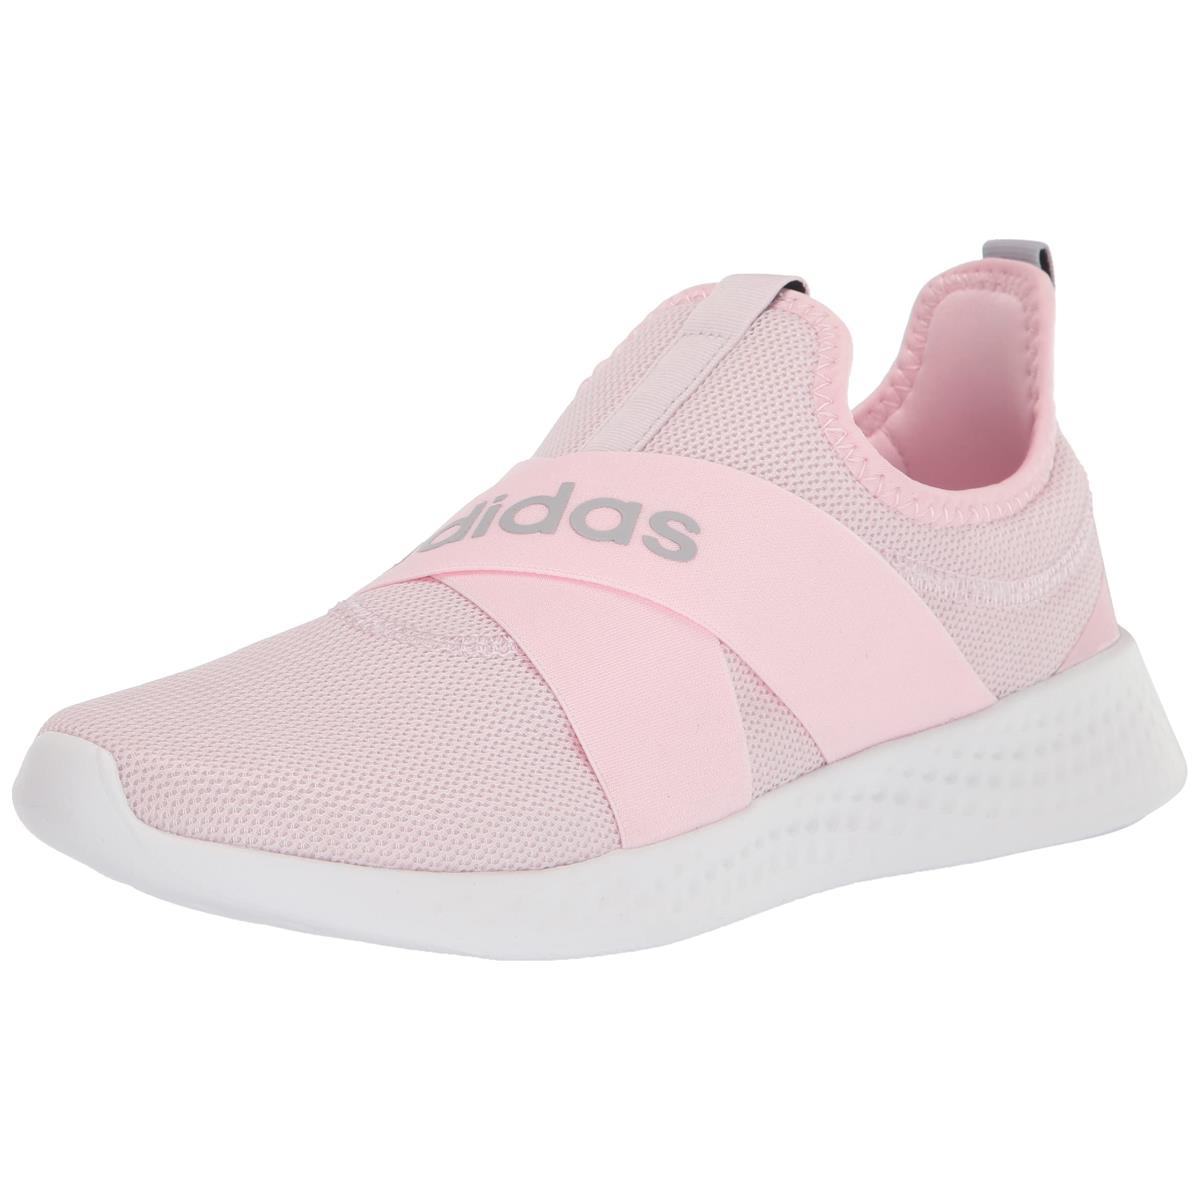 Adidas Women`s Puremotion Adapt Almost Pink/Almost Pink/Clear Pink